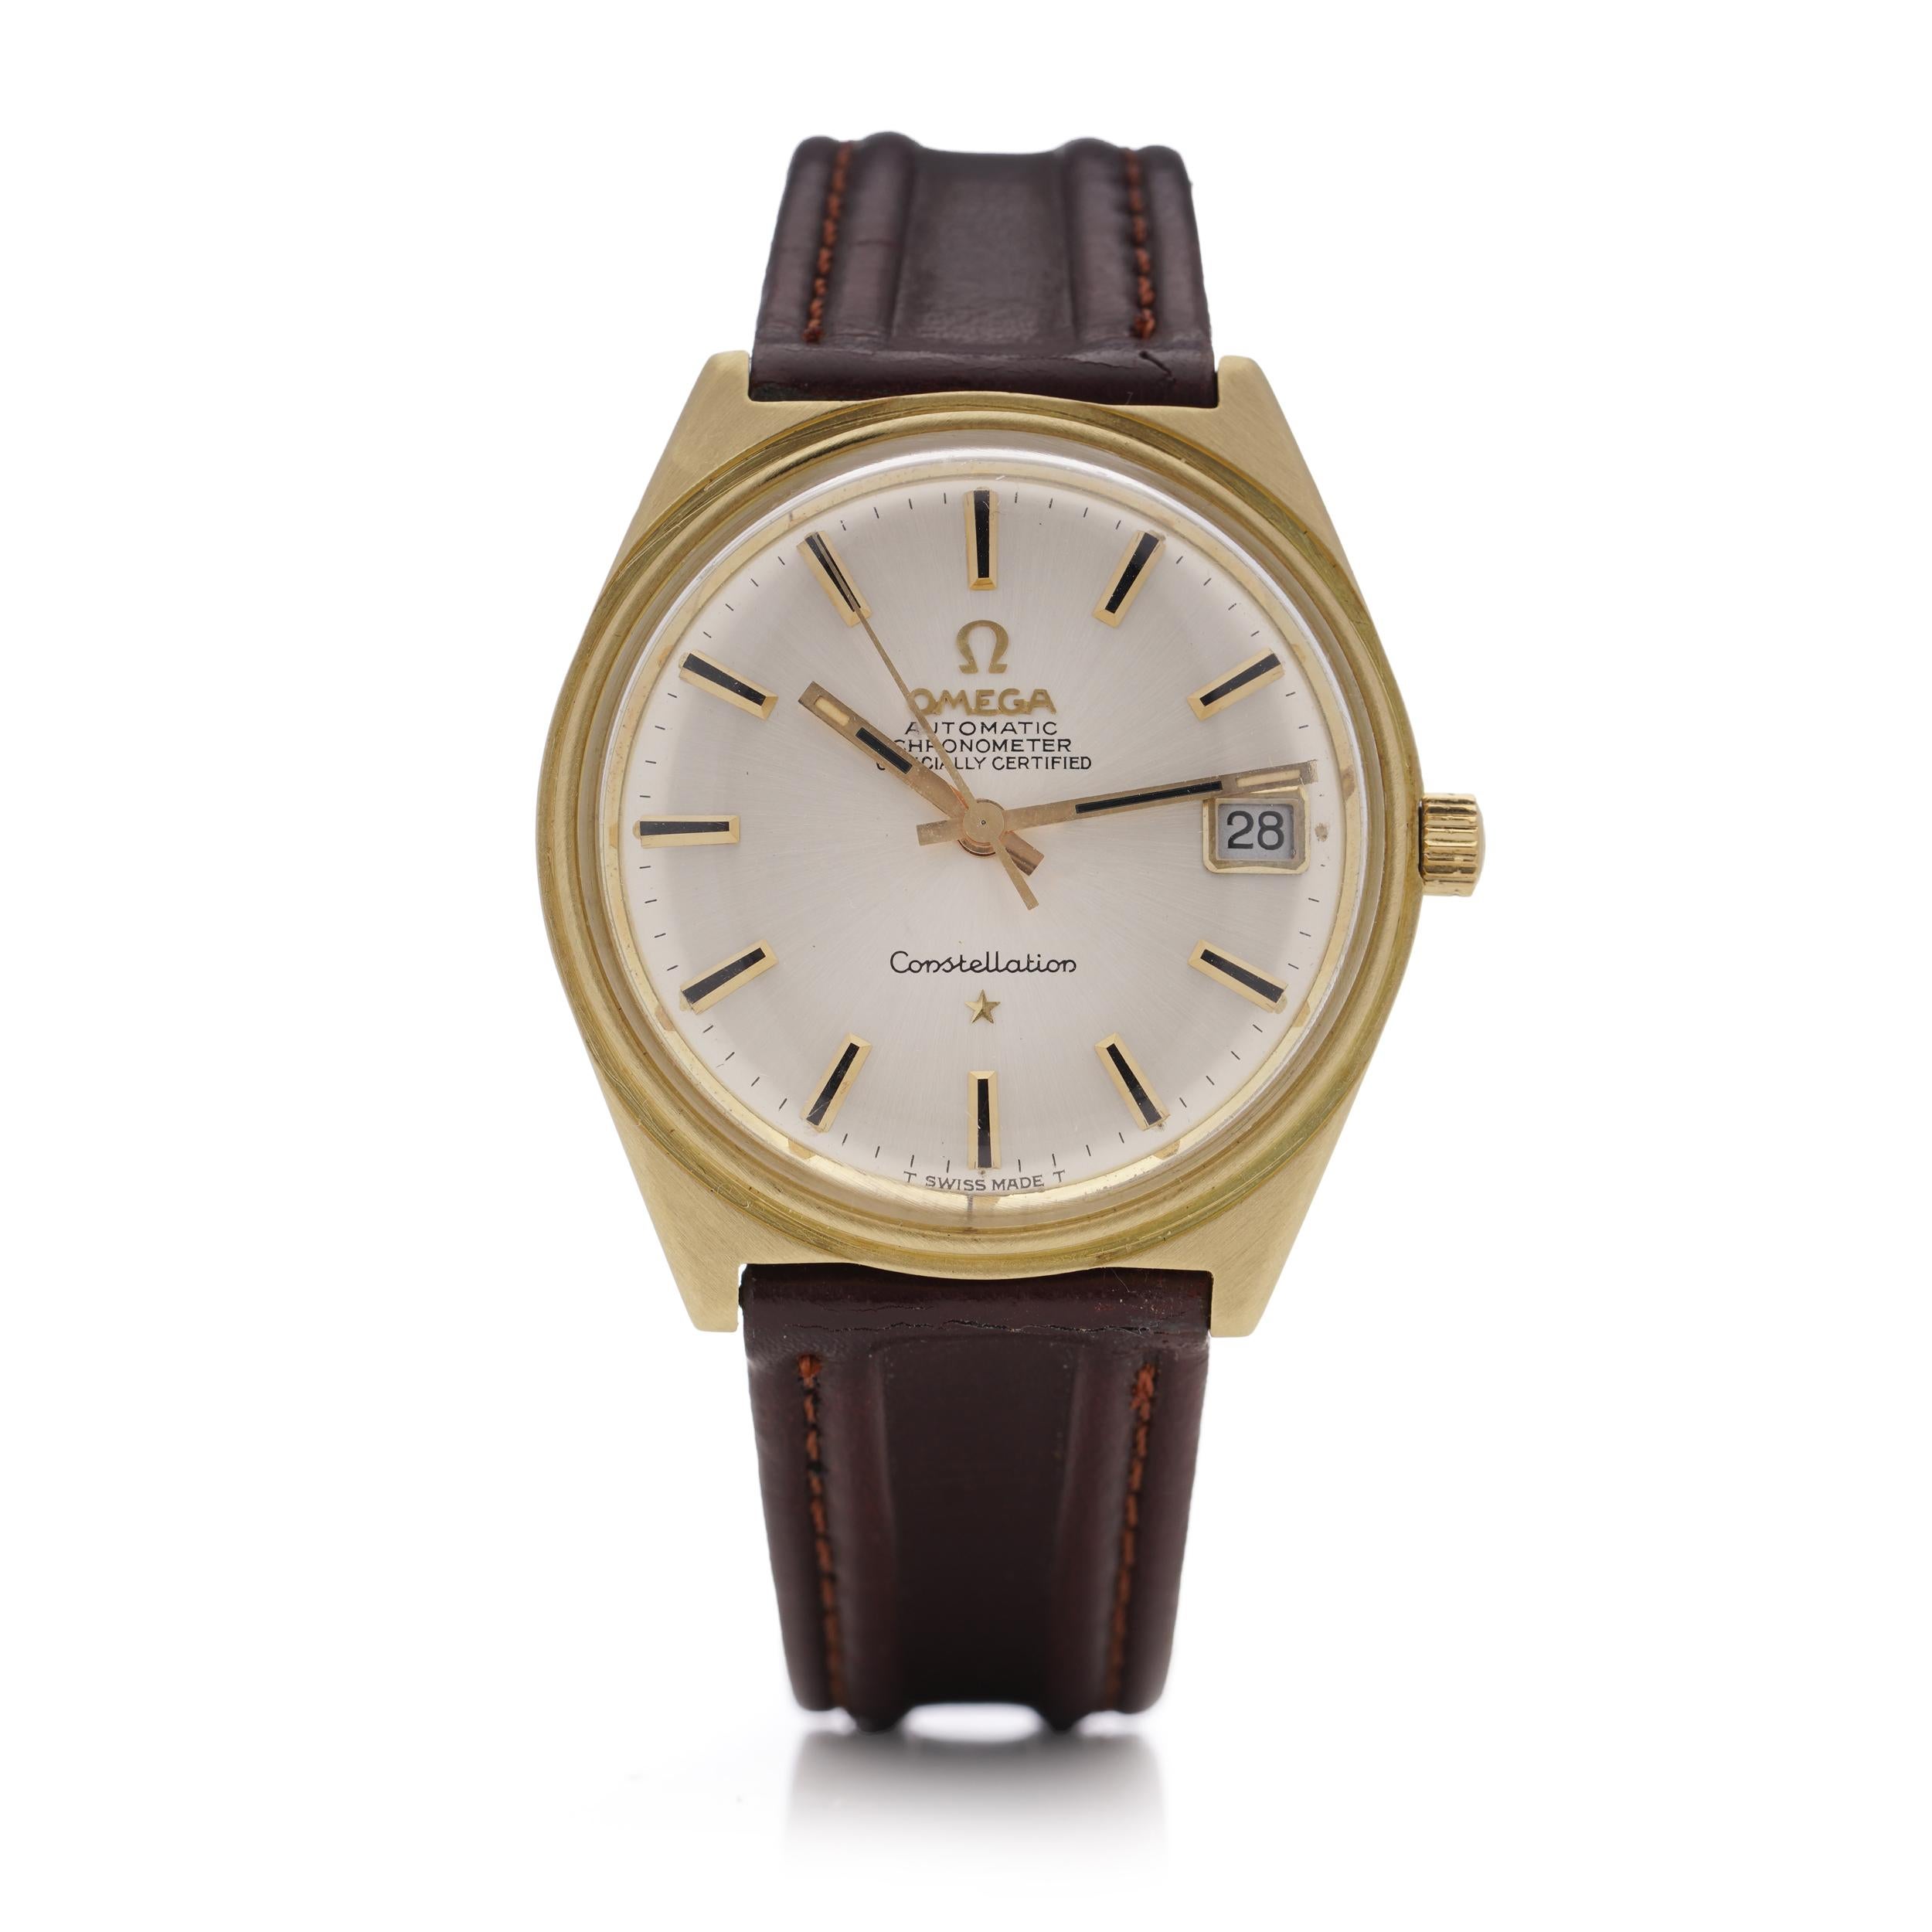 Vintage 18kt. gold men's Omega Constellation automatic wristwatch, Ref. 168015

Brand: Omega
Collection: Constellation
Model: Constellation
Reference: Omega - 168015
Category: Wrist Watch
Period: 1970's
Movement: Automatic
Caliber: 564
Case